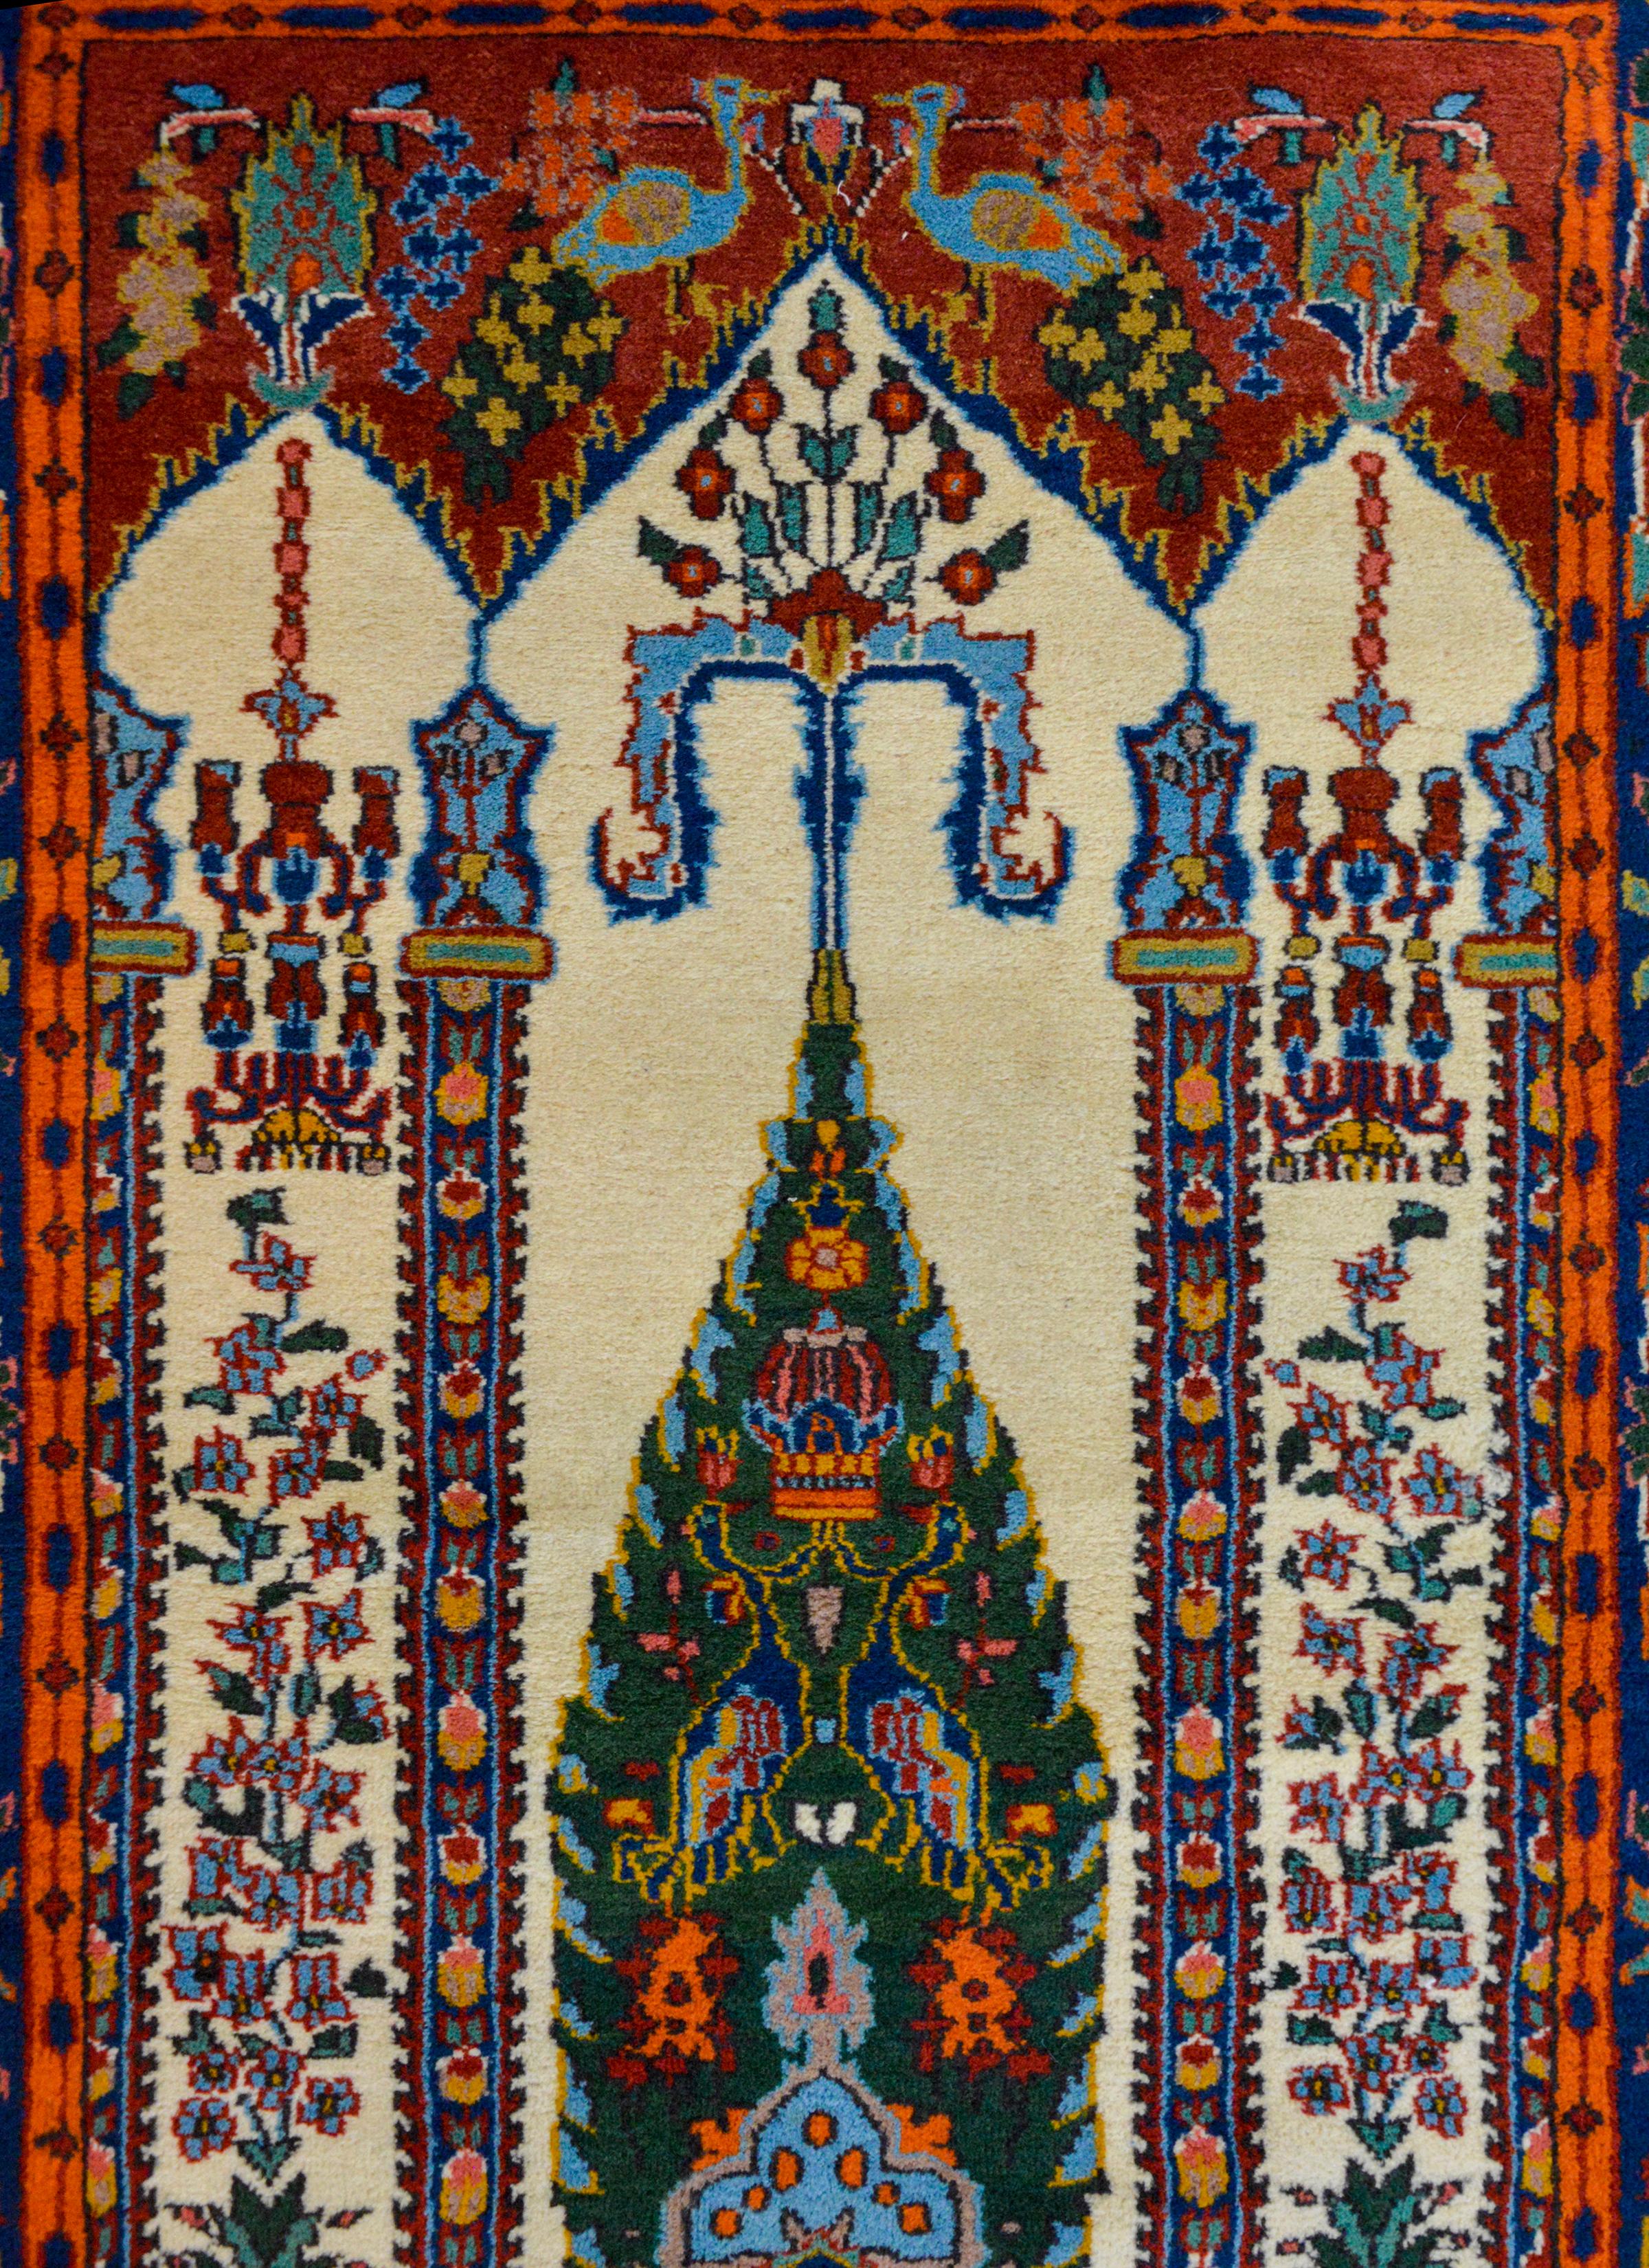 An extraordinary vintage Indian Bakhtiari Style prayer rug depicting myriad potted flowers and trees, and birds inside an architectural interior with hanging chandeliers. The border is wonderfully expressive with more flowers and birds flanked by a